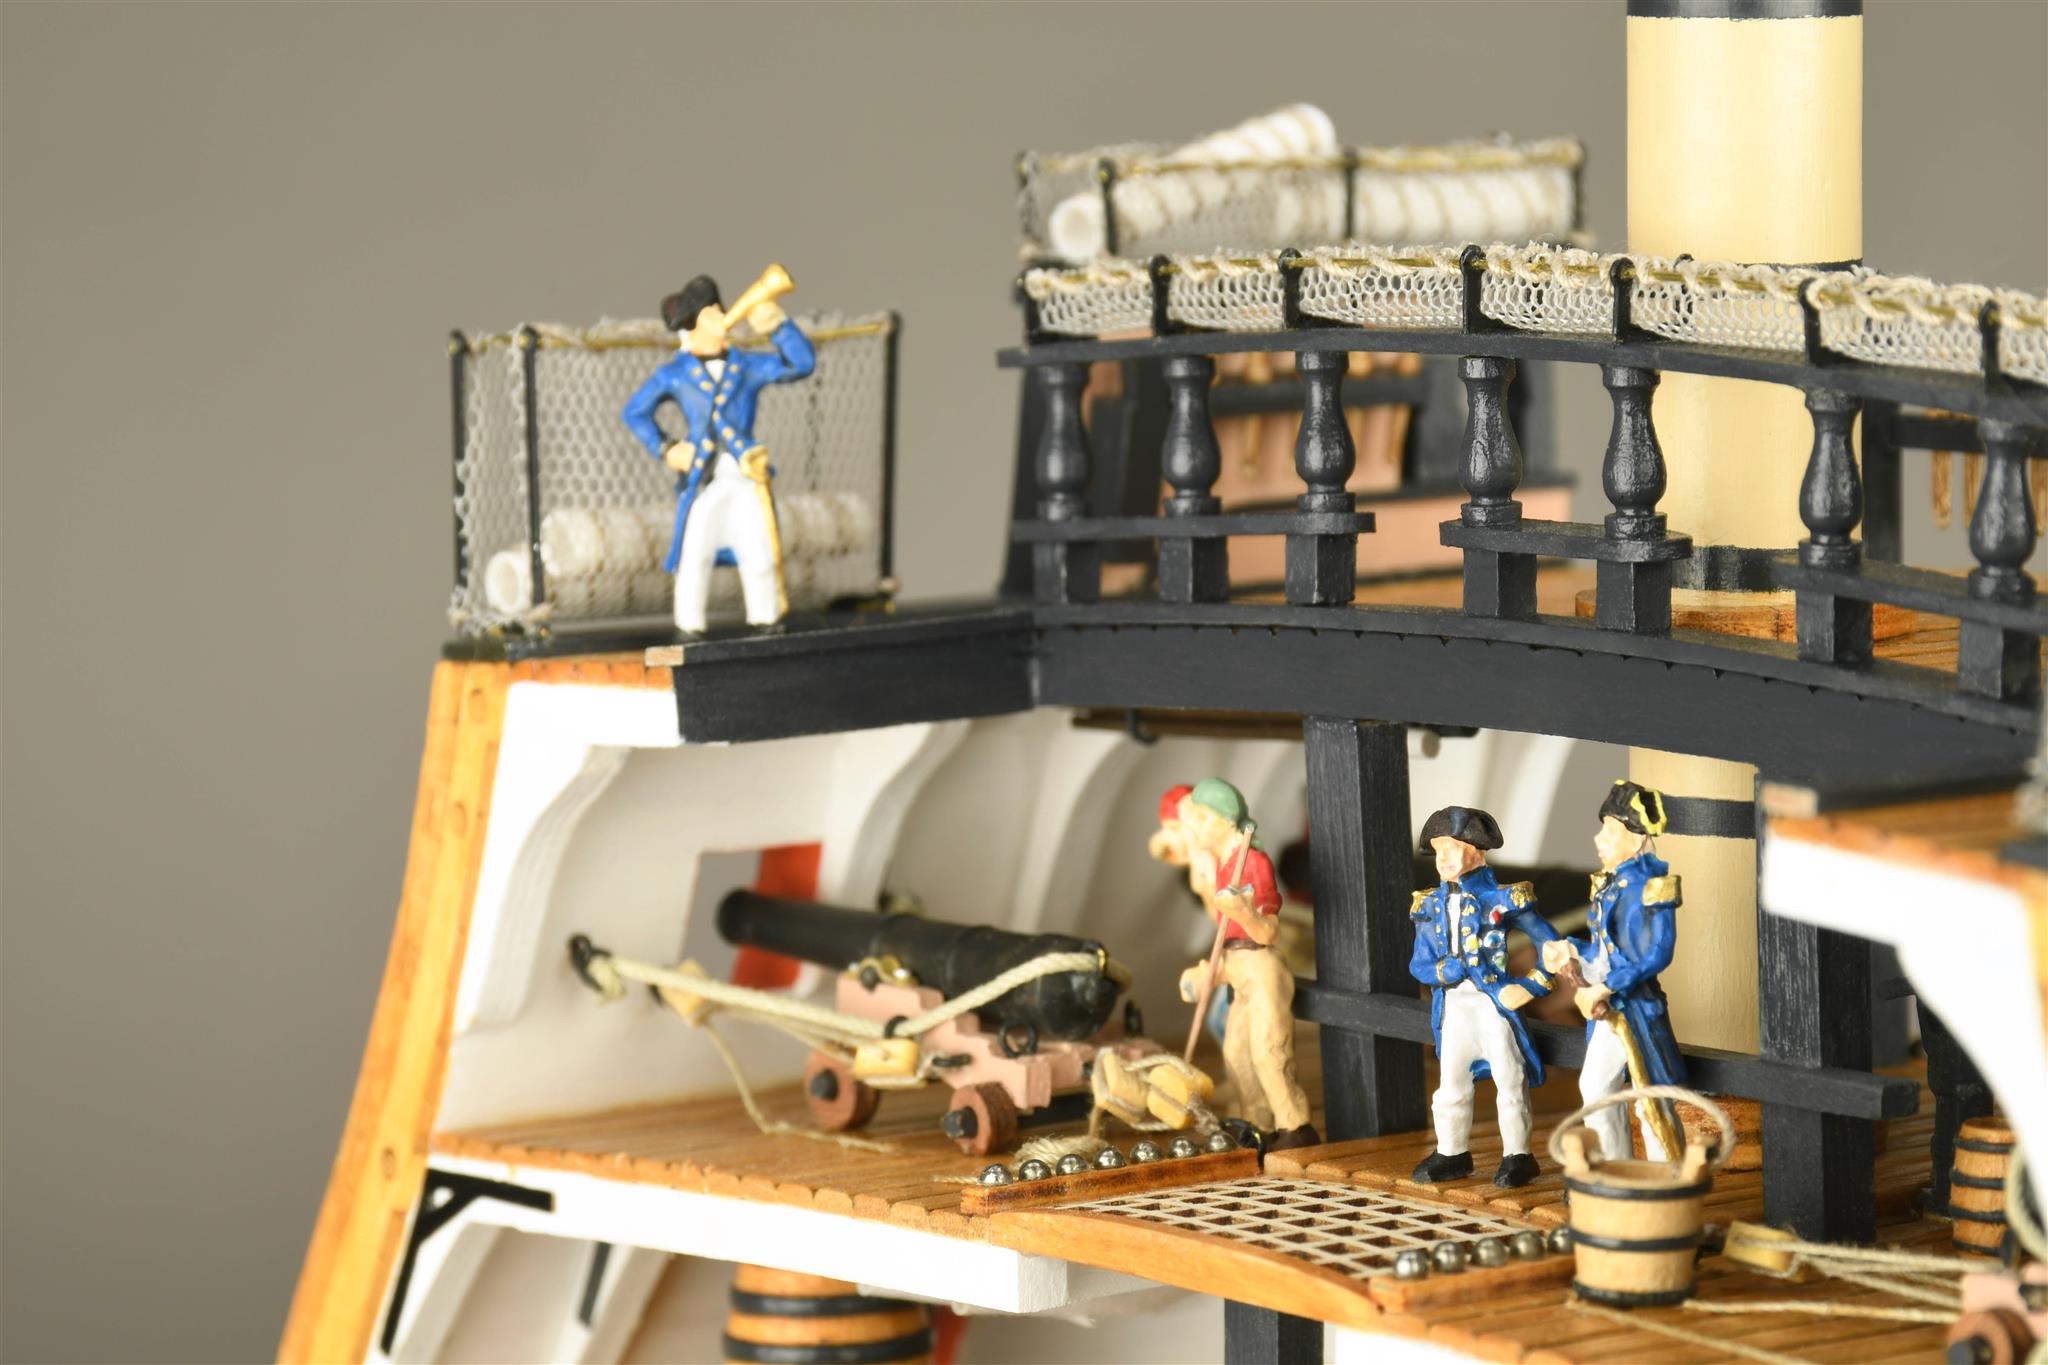 HMS Victory Model Ship Cross-Section in Wood (20500) by Artesanía Latina.